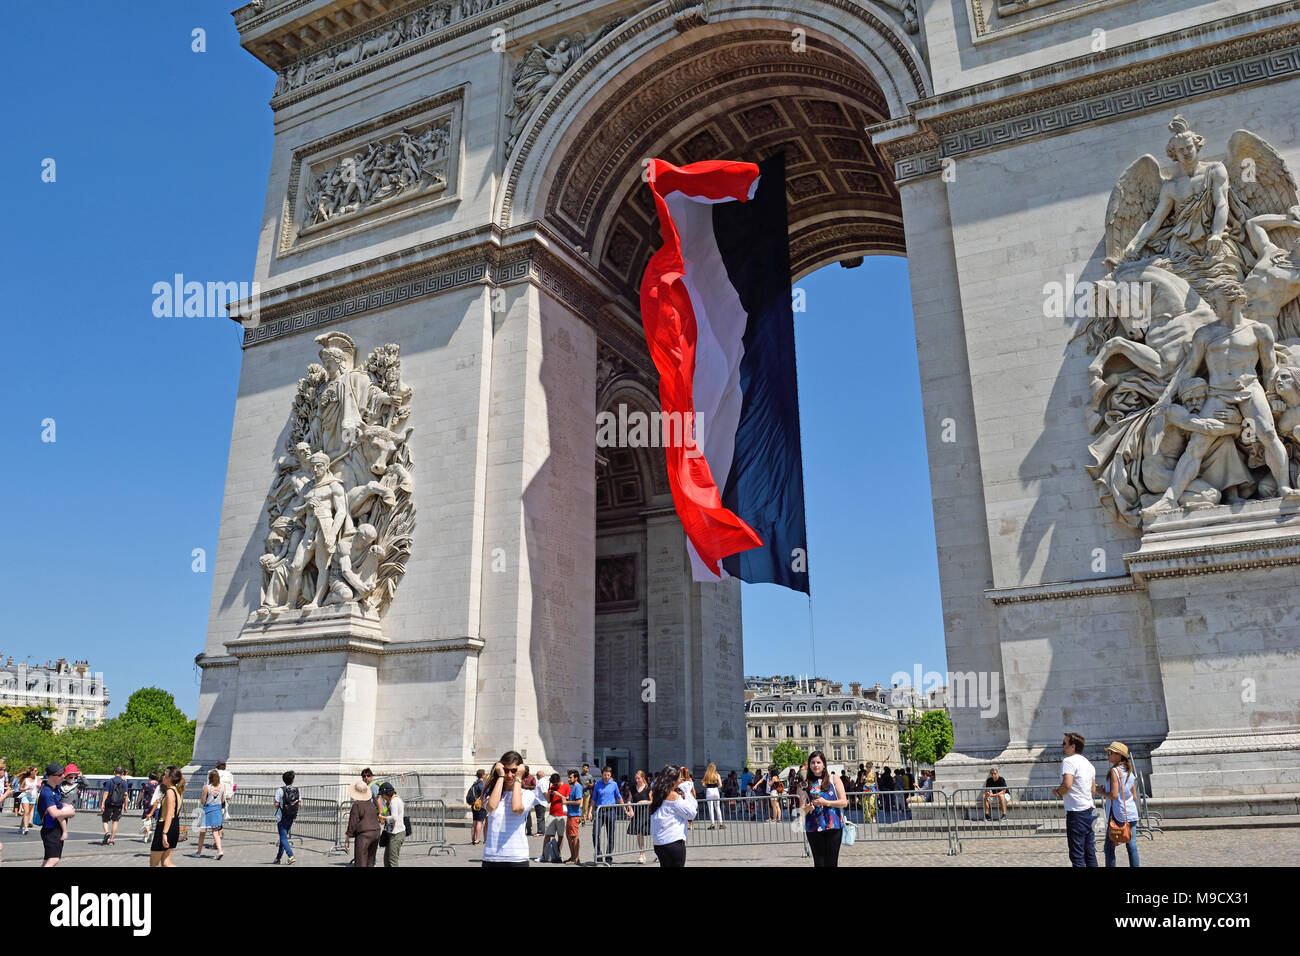 Paris, France. June 18, 2017. The French flag blowing in the wind under the Arch de Triumph in Paris Stock Photo